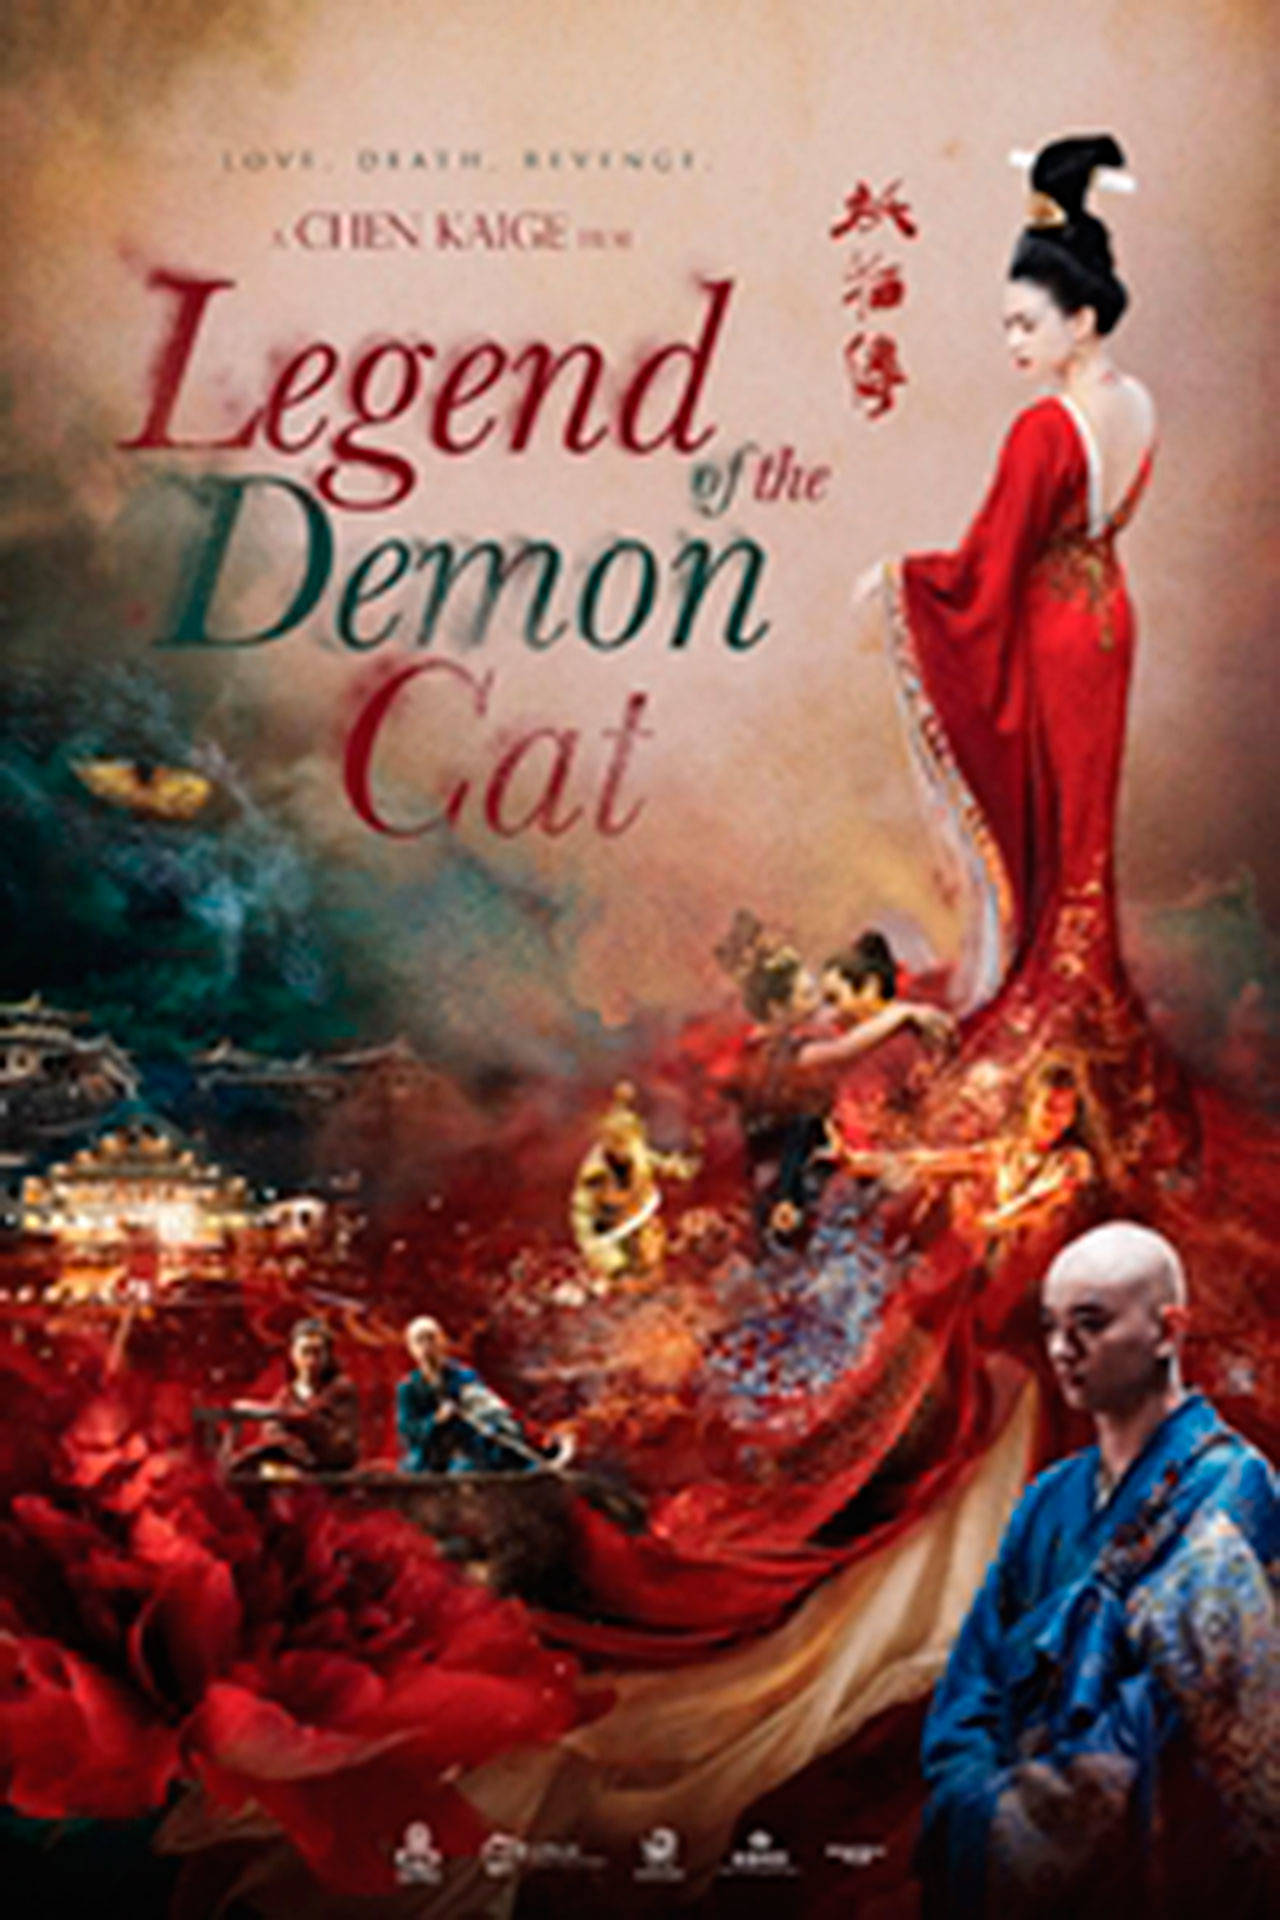 Image courtesy of Bainbridge Cinemas | Chen Kaige’s latest film “Legend of the Demon Cat” will be shown as part of a special one-night-only event at Bainbridge Cinemas at 7 p.m. Tuesday, Feb. 5.